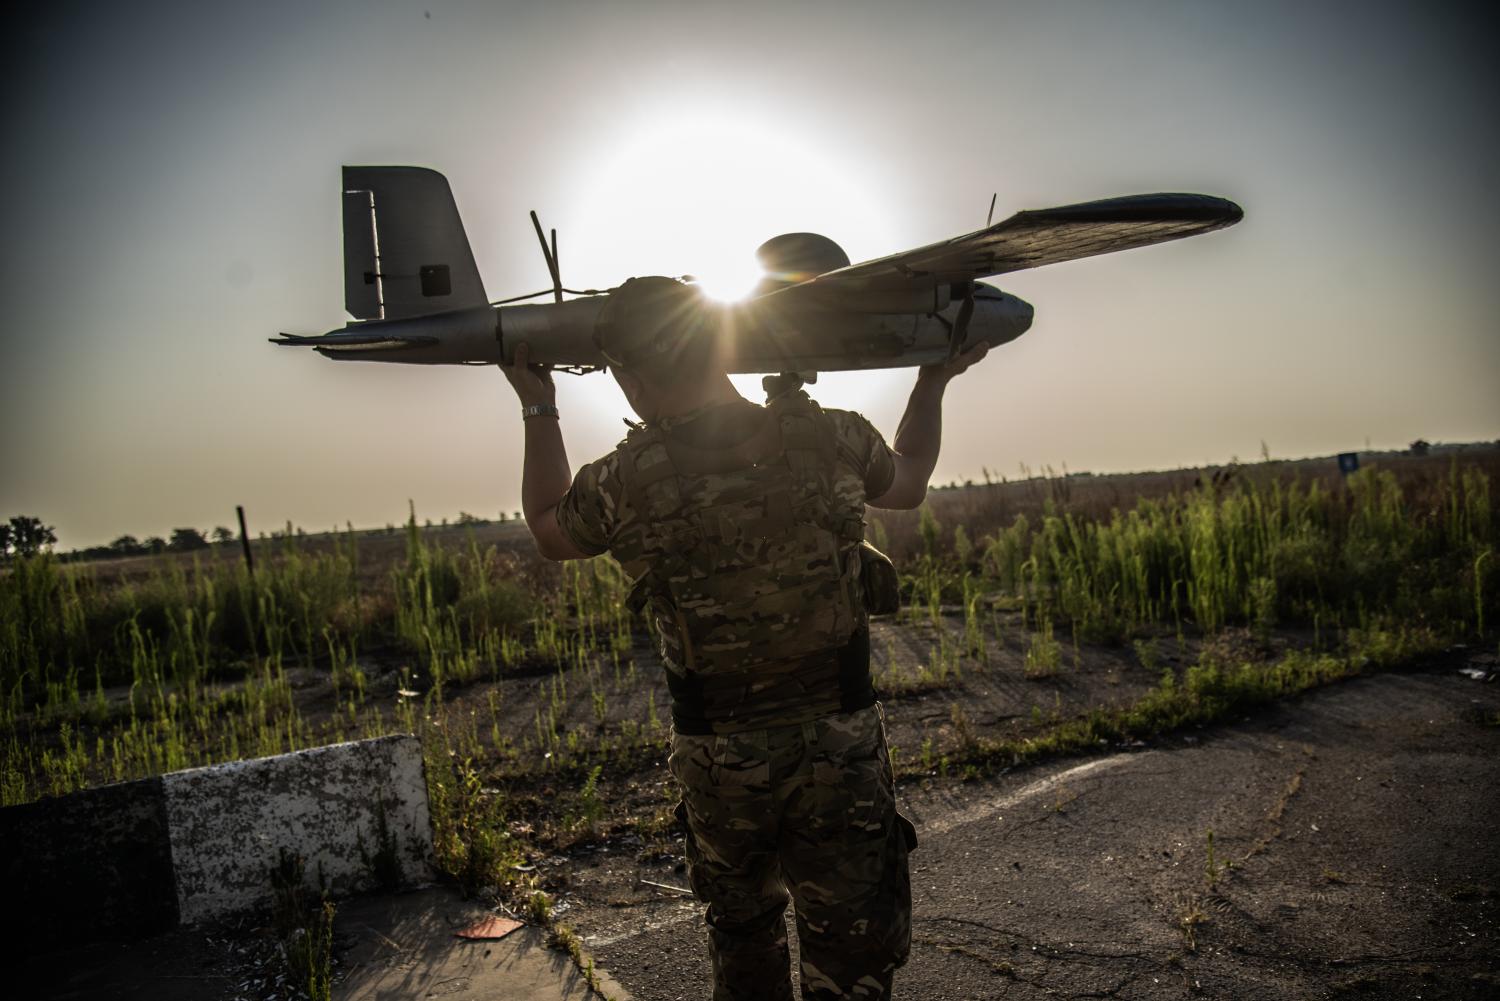 Flying on the front: Combat Drones Against Russia